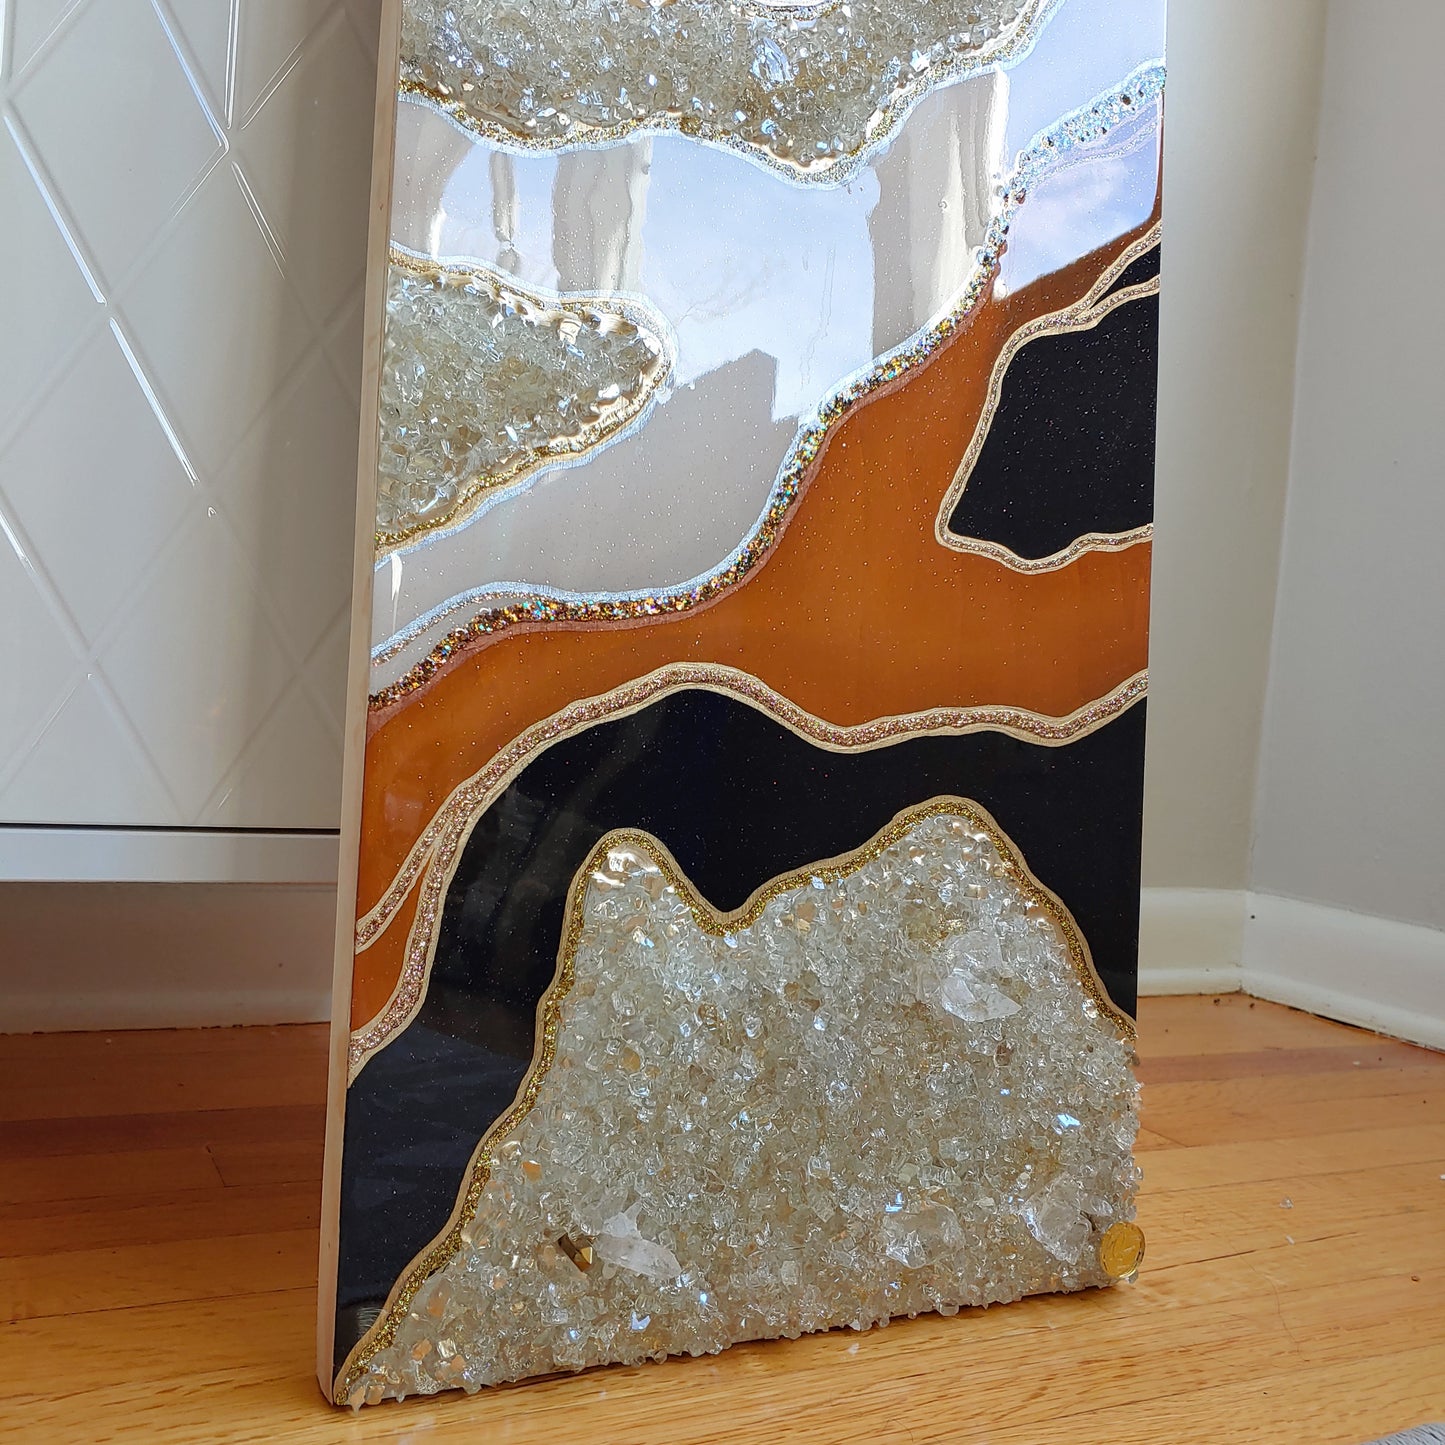 Caramel & Espresso Resin, Glass and crystal wall art panel